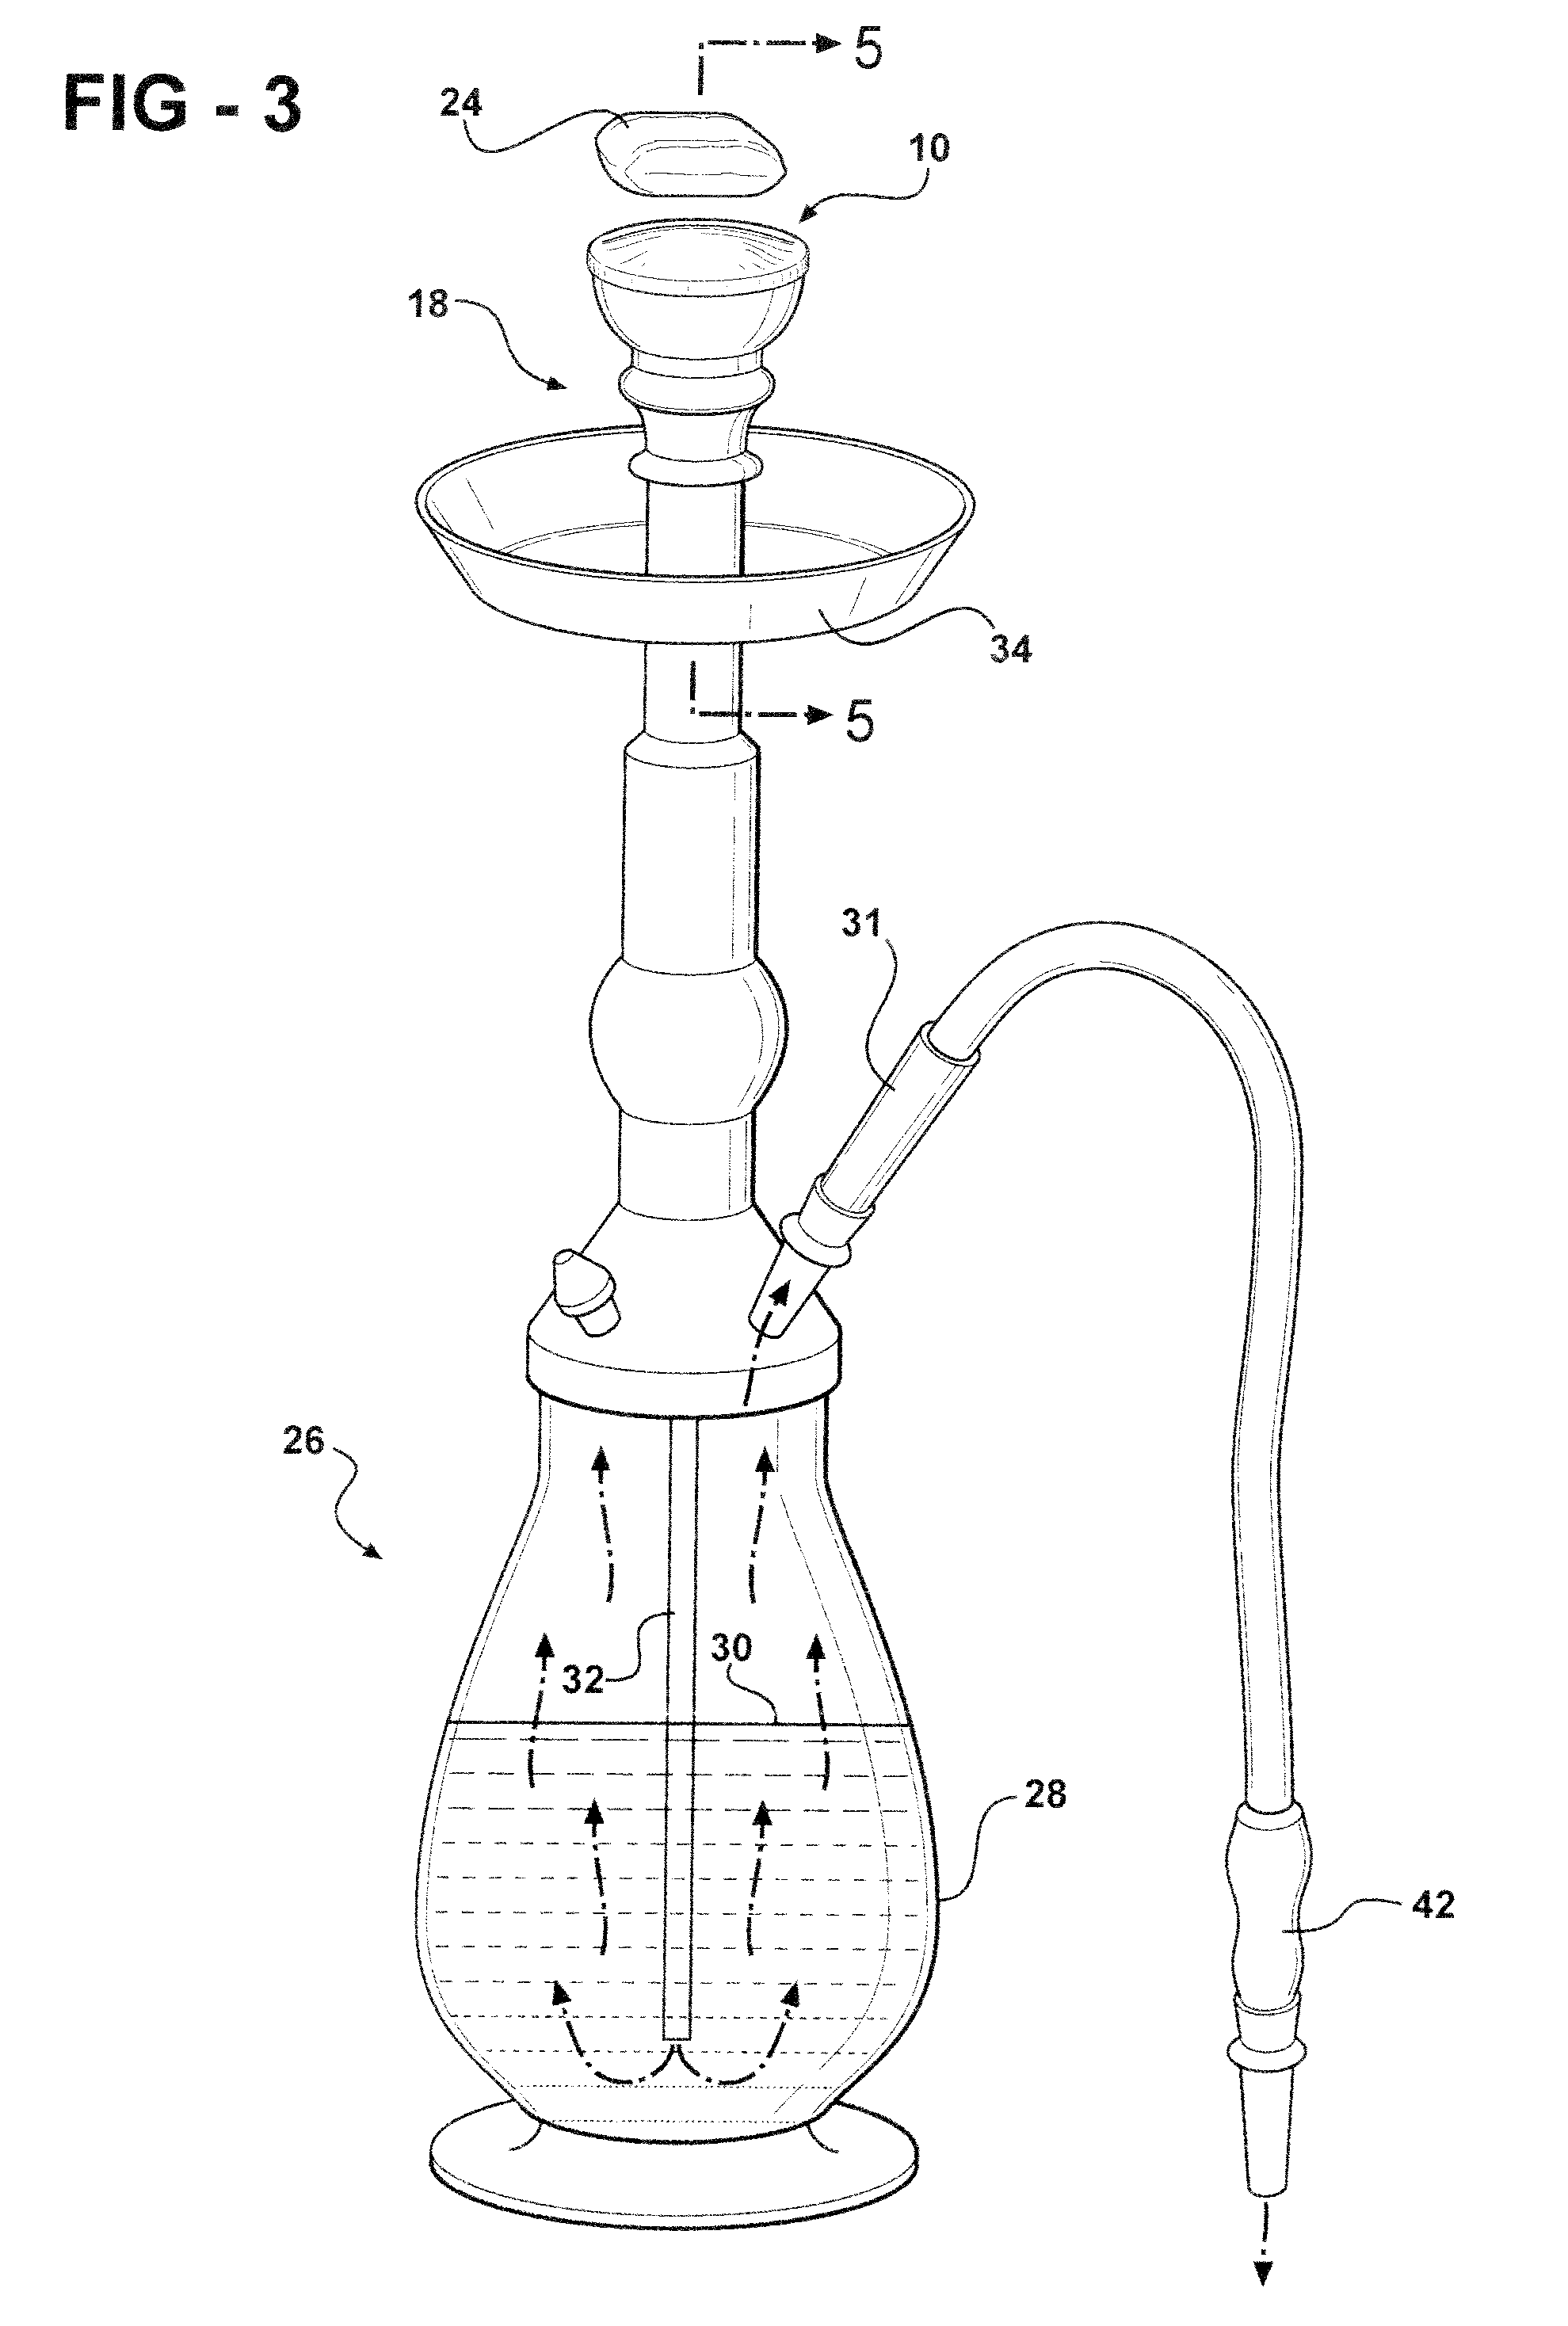 Pre-sealed foil pouch containing such as flavored tobacco for use with a hookah pipe and head attachment assembly